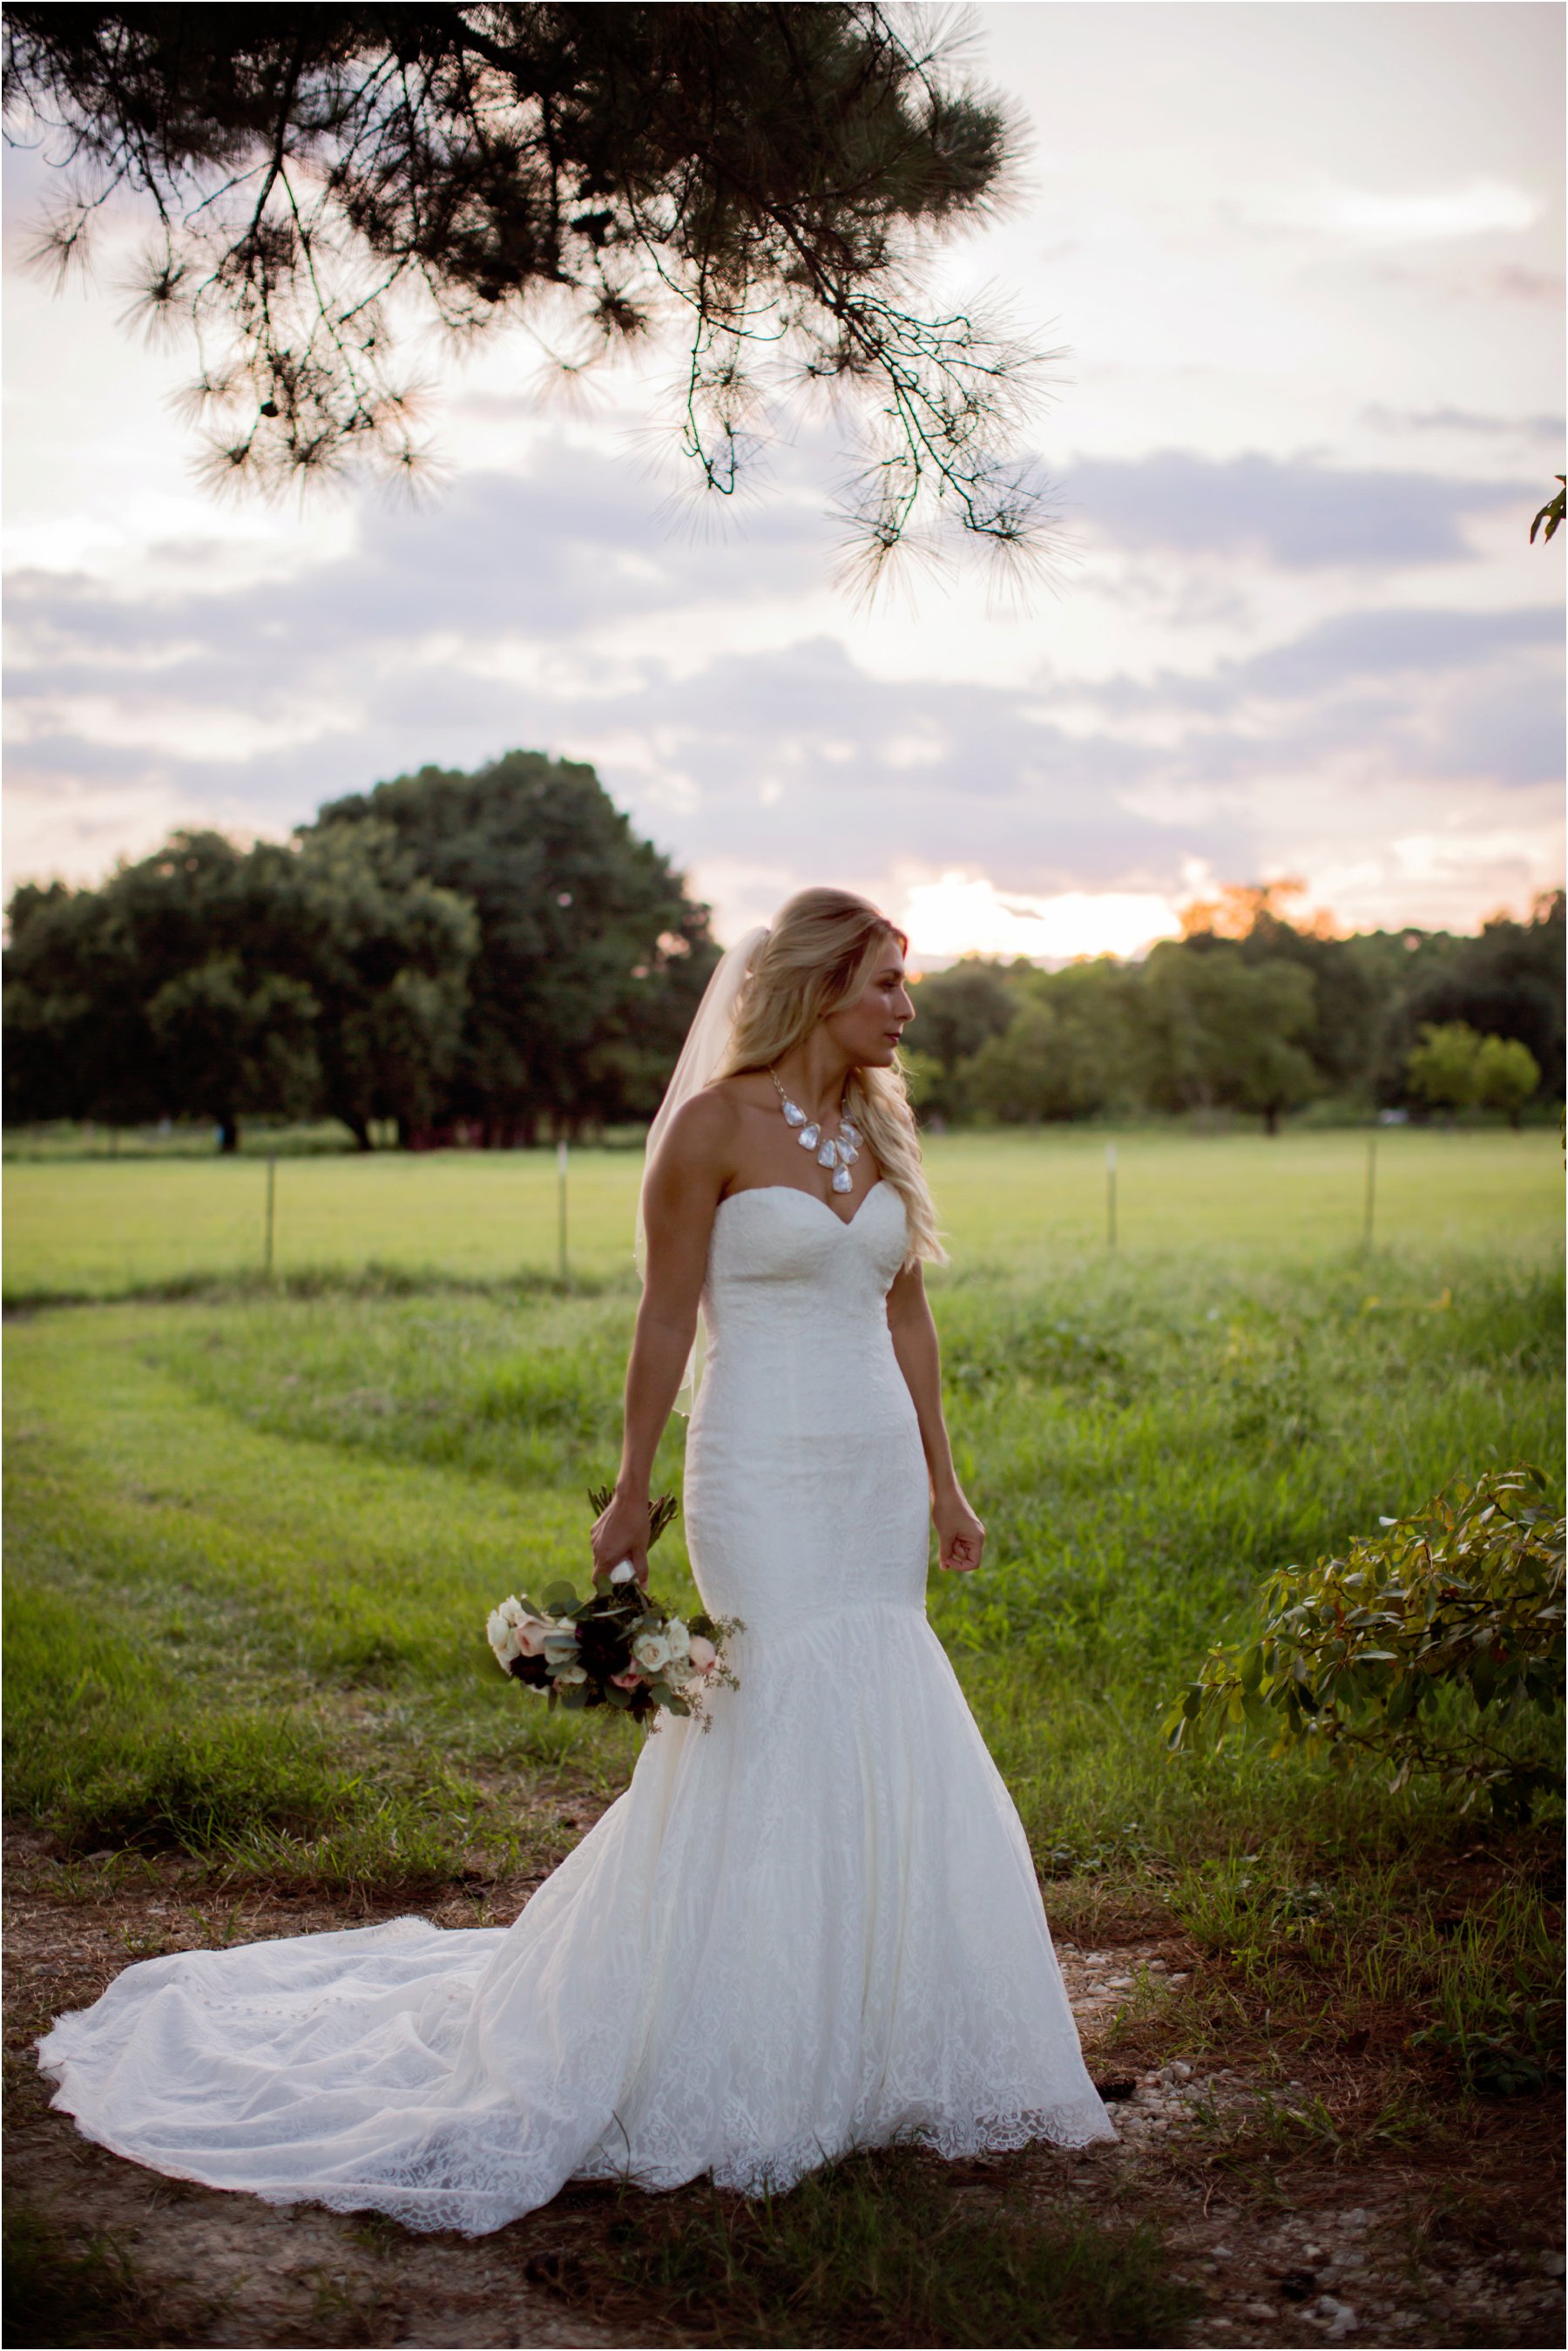 Wedding Photographer Sydney Packages